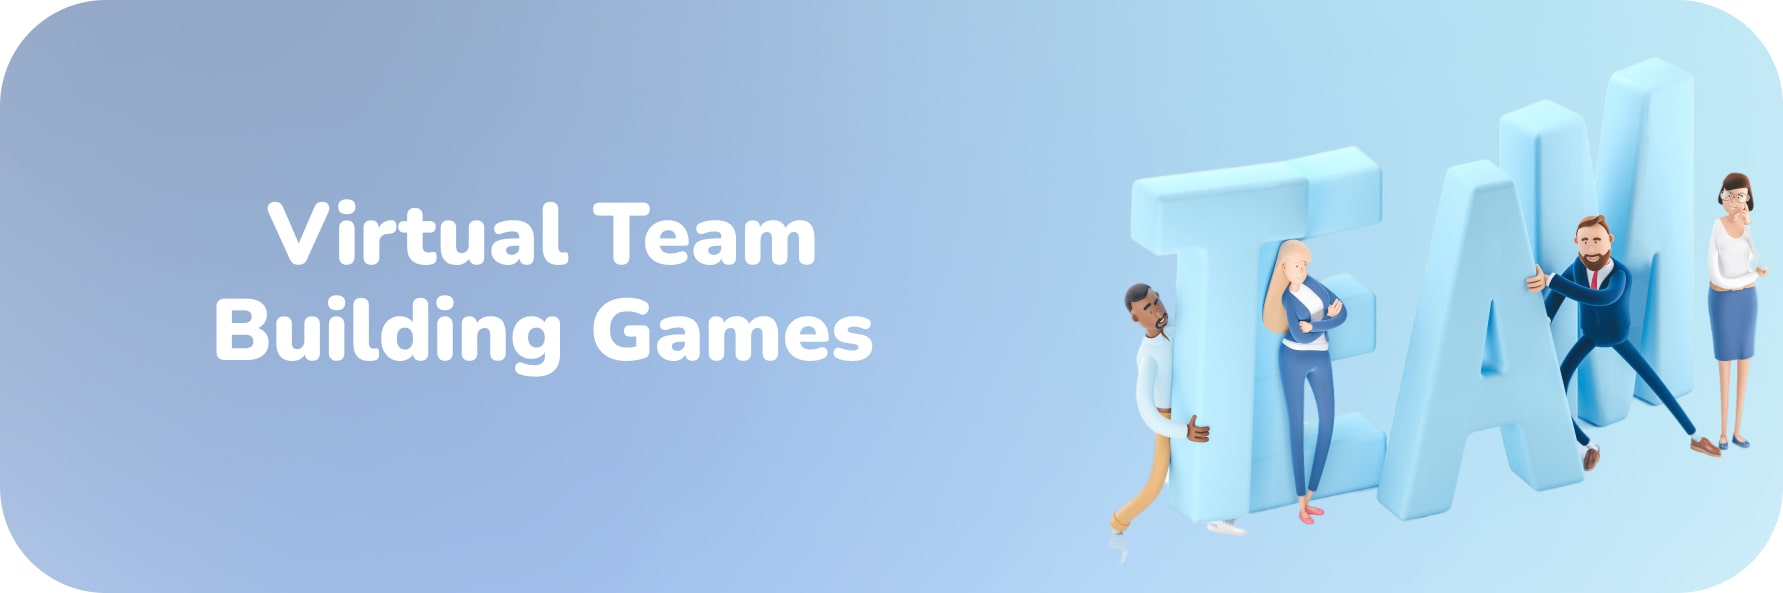 15+ Virtual Team Building Games to Boost Employee Engagement
